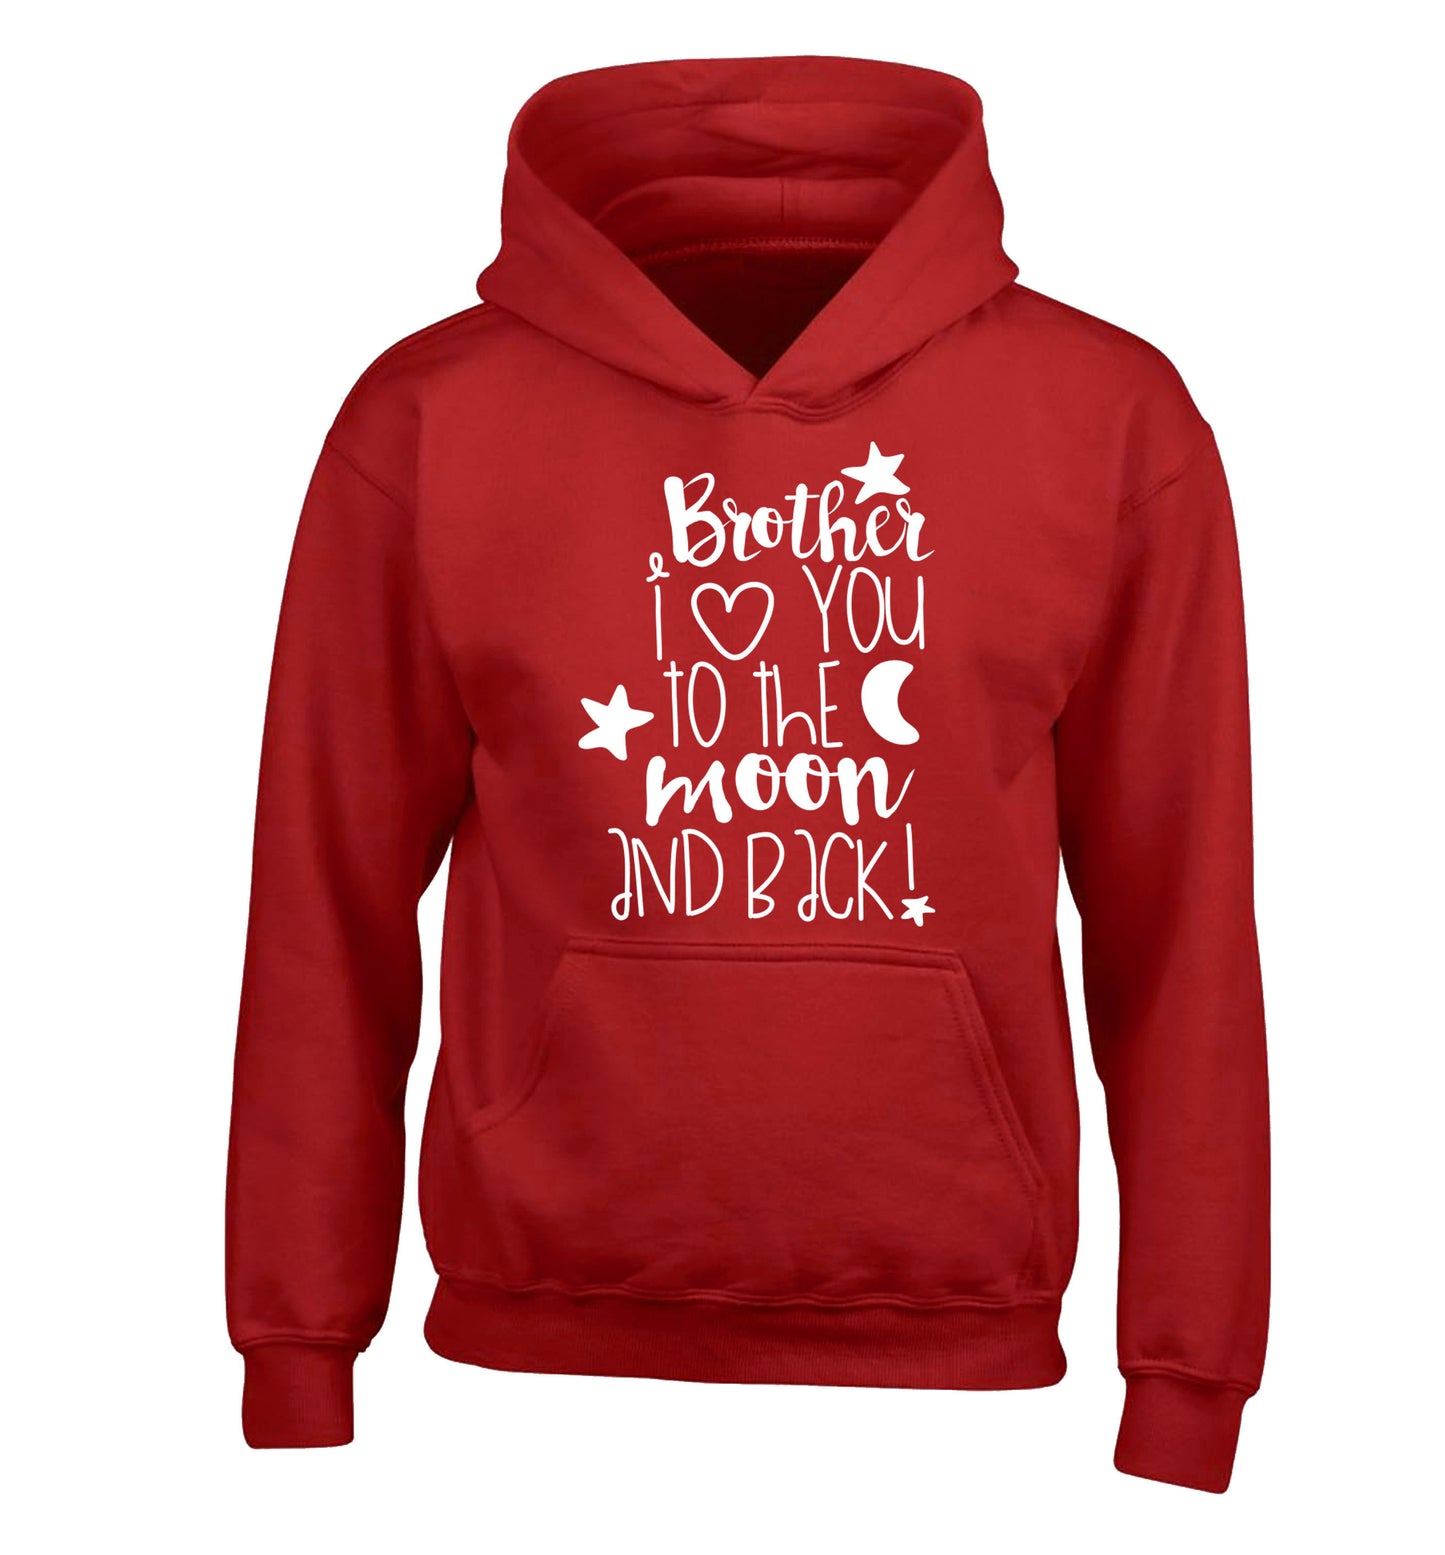 Brother I love you to the moon and back children's red hoodie 12-14 Years